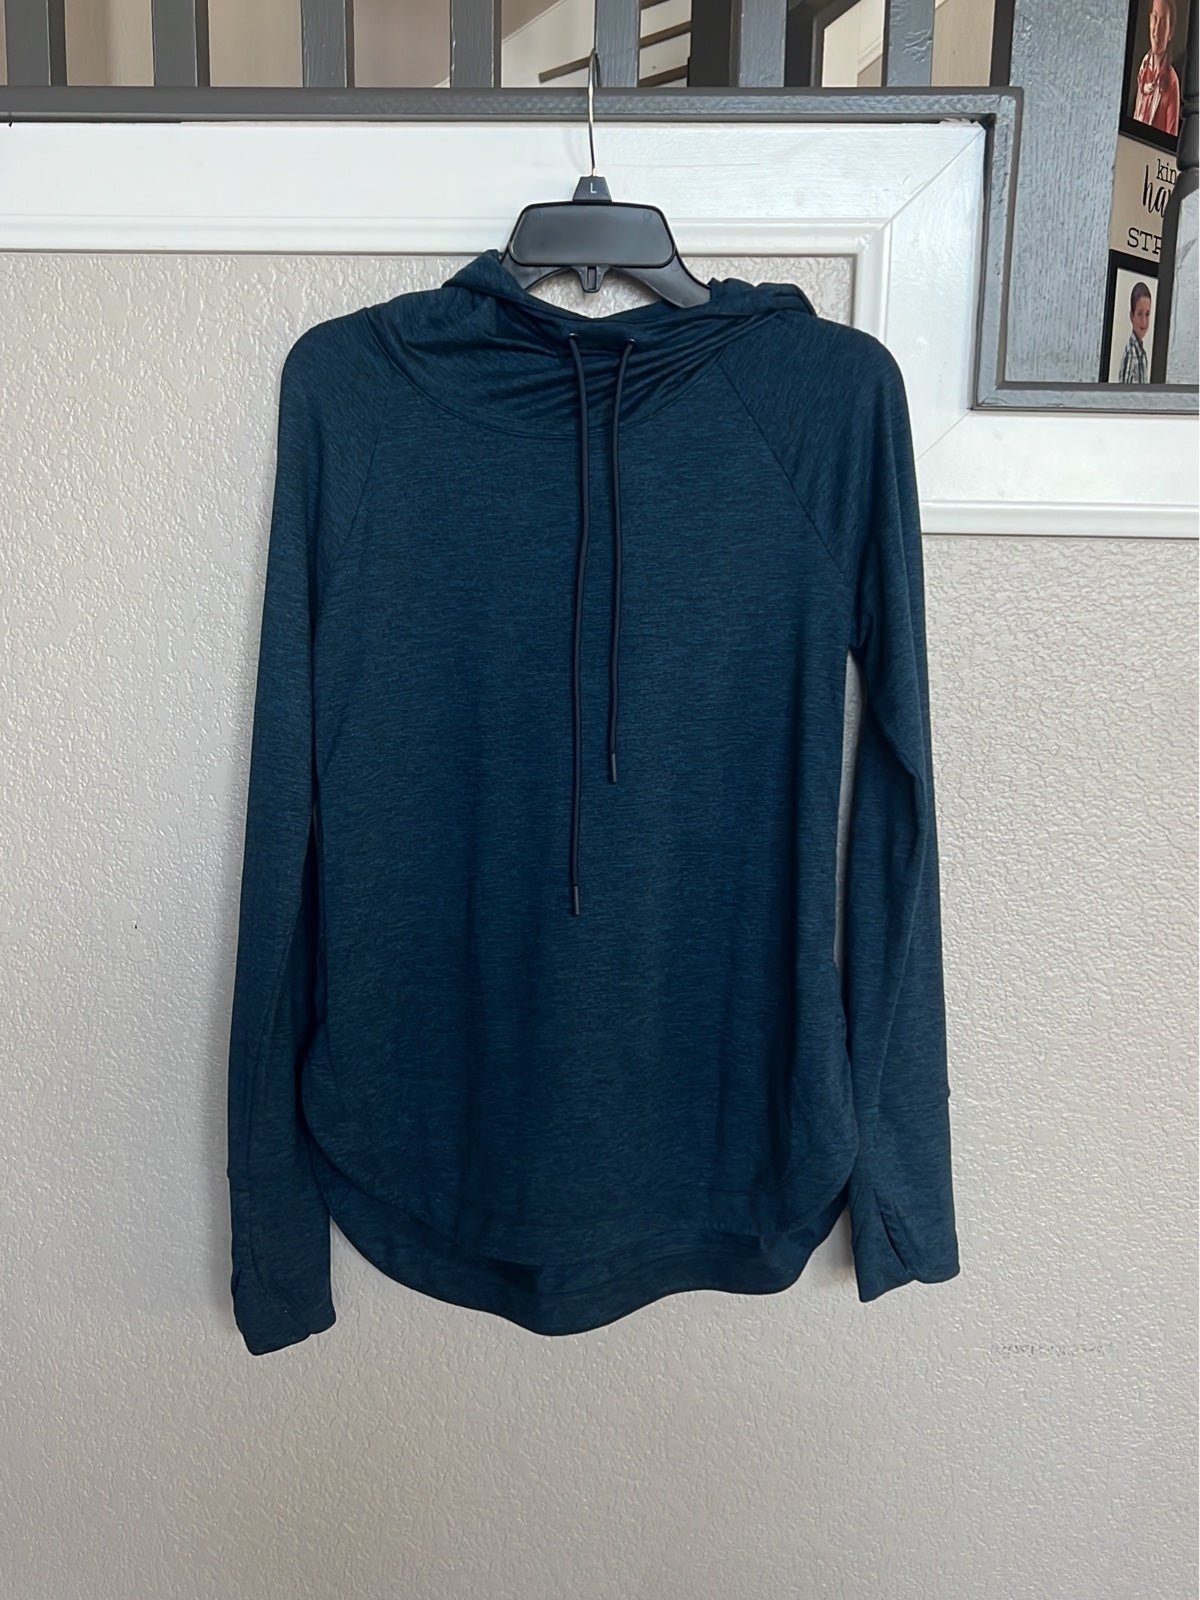 save up to 70% Athleta Uptempo Hoodie Pk0XWdVM7 Buying Cheap